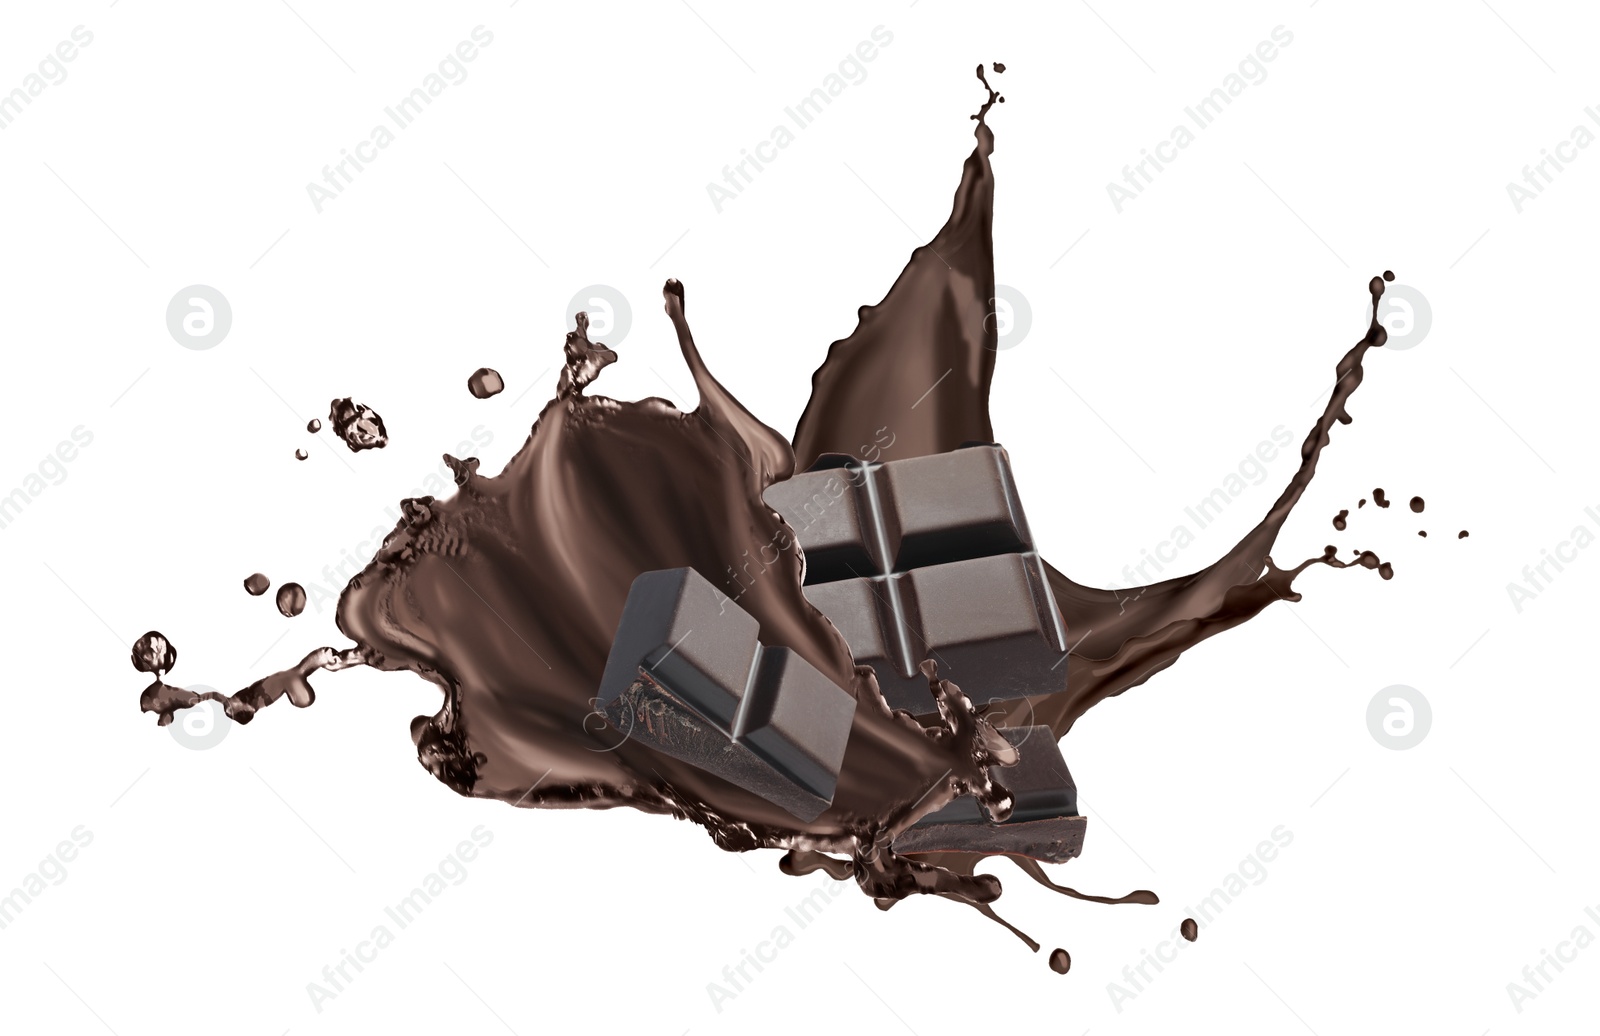 Image of Yummy melted chocolate and falling pieces on white background